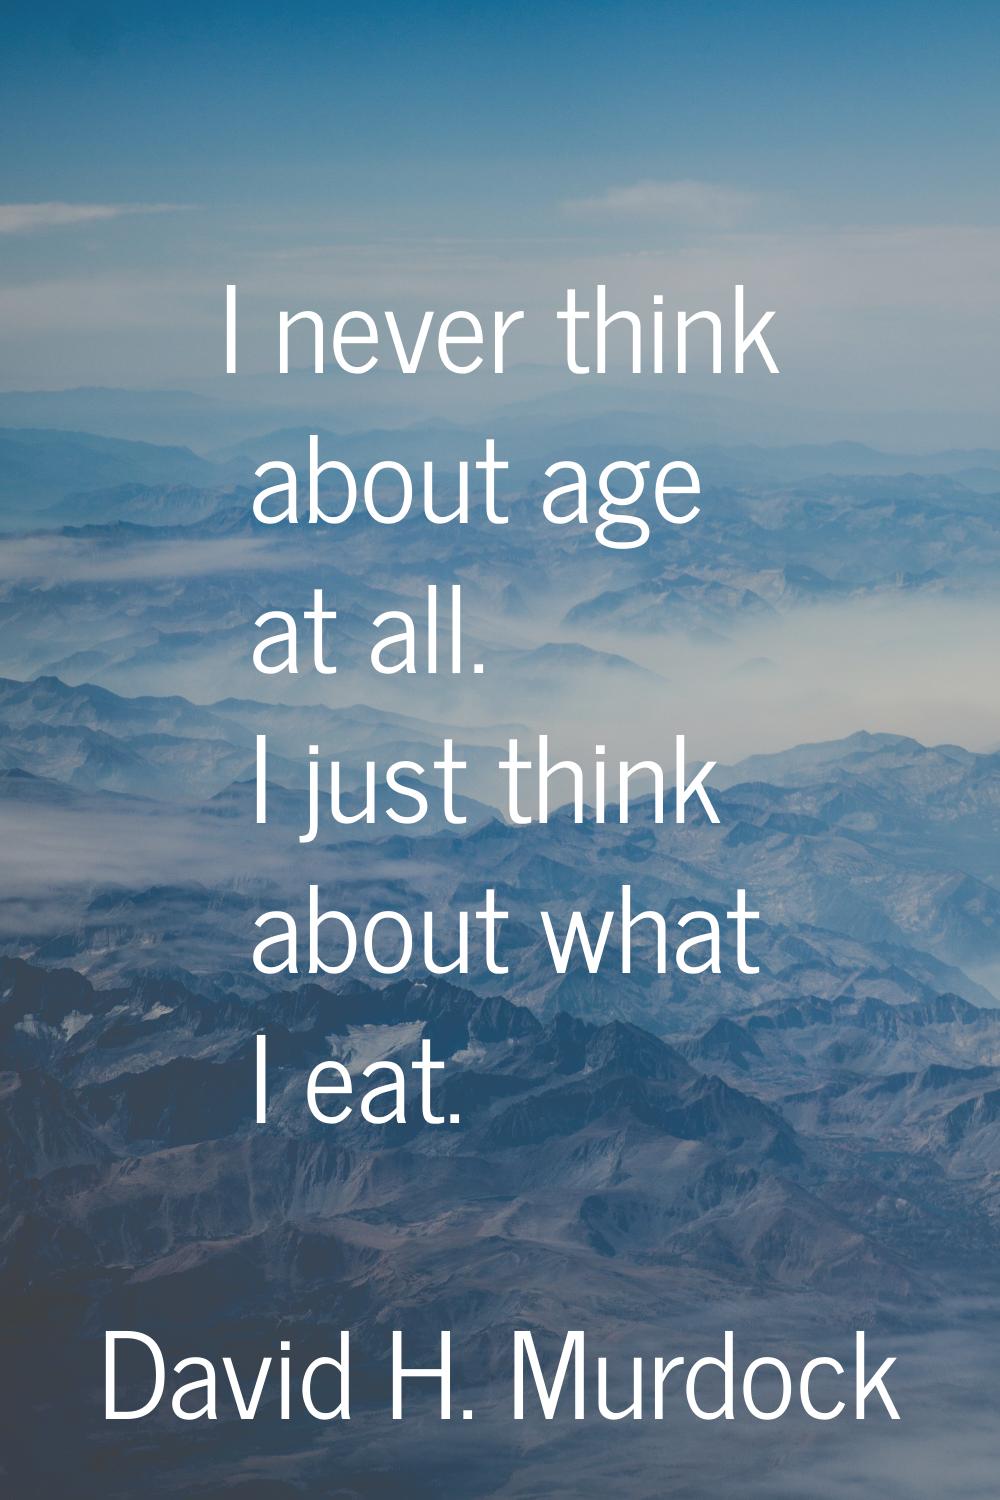 I never think about age at all. I just think about what I eat.